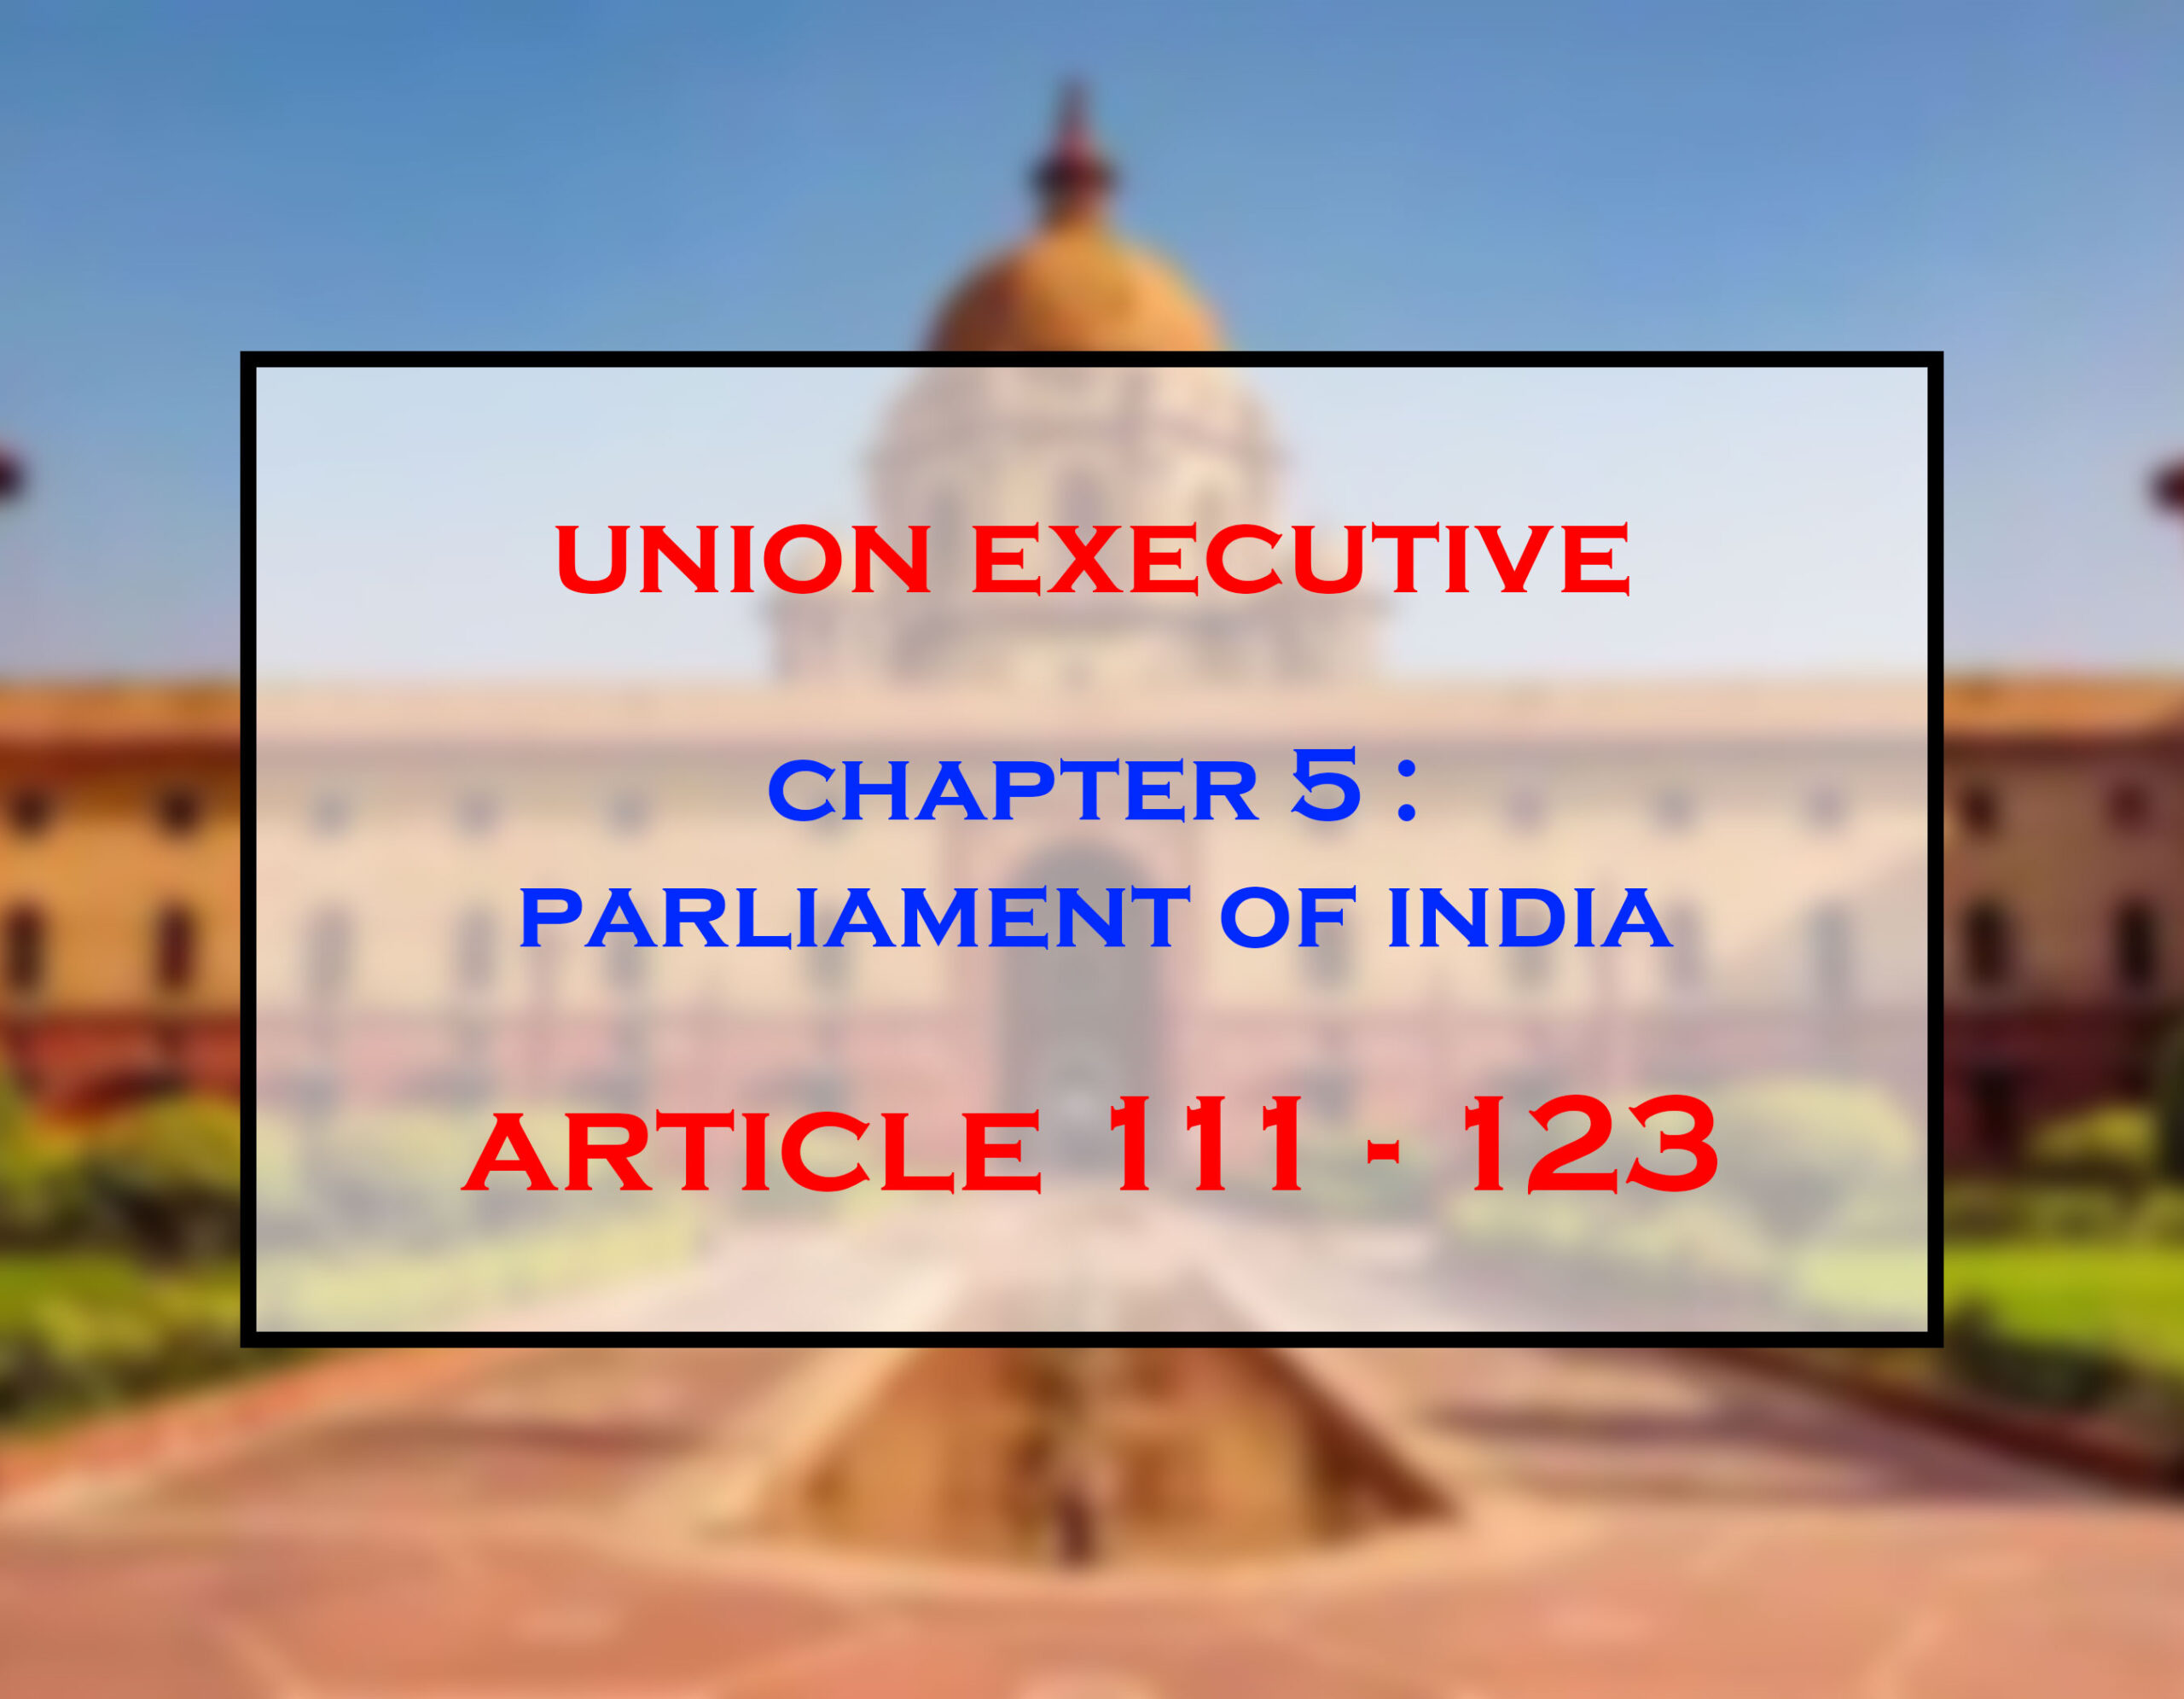 Parliament of India (Article 111-123)